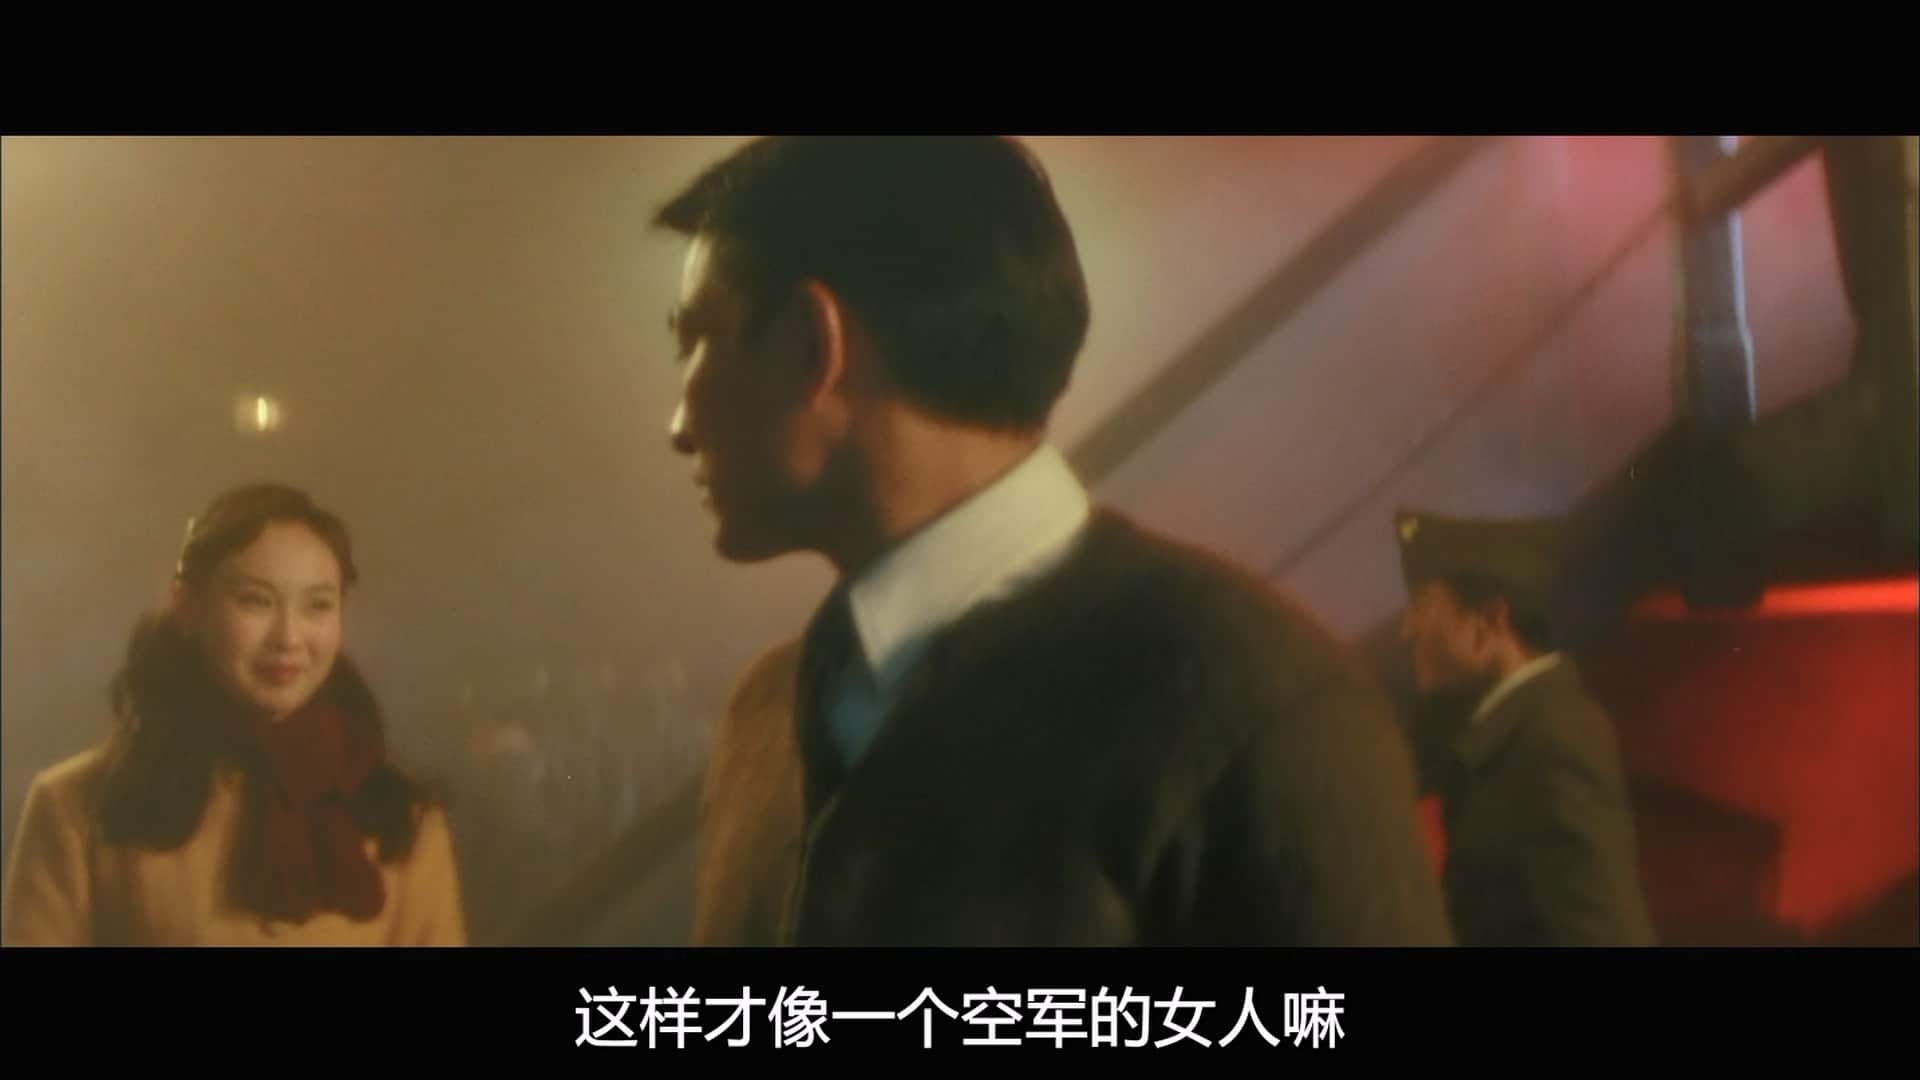 A.Moment.of.Romance.1996.WEB-DL.1080p.HEVC.AAC.Cantonese-OPS.mkv_20230829_182130.120.jpg